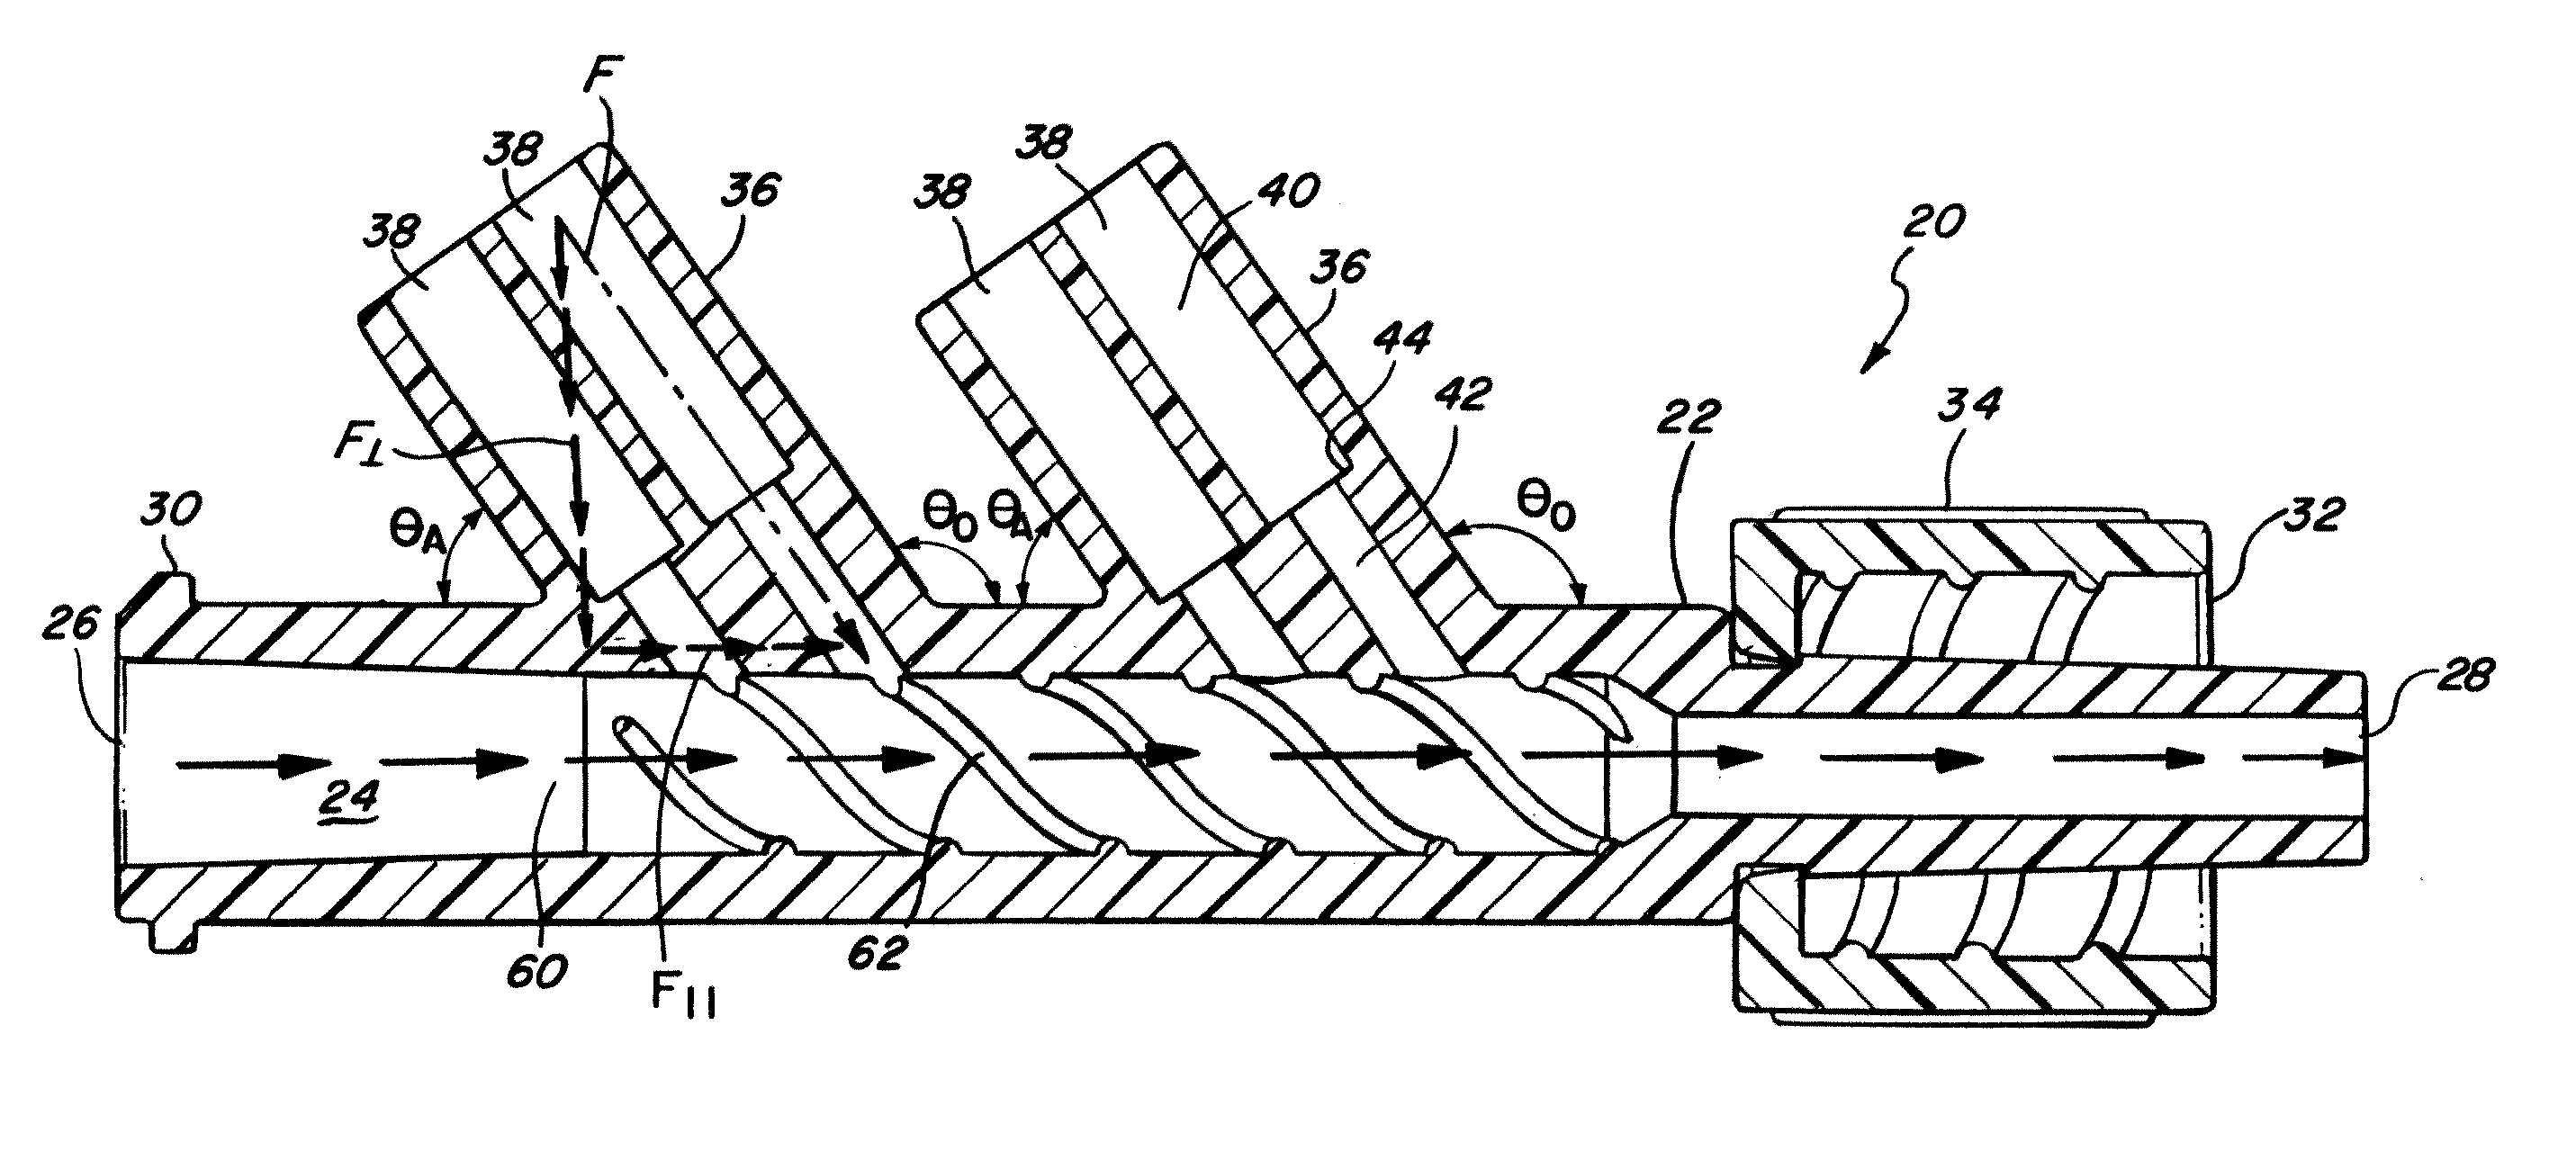 Multiple-line connective devices for infusing medication